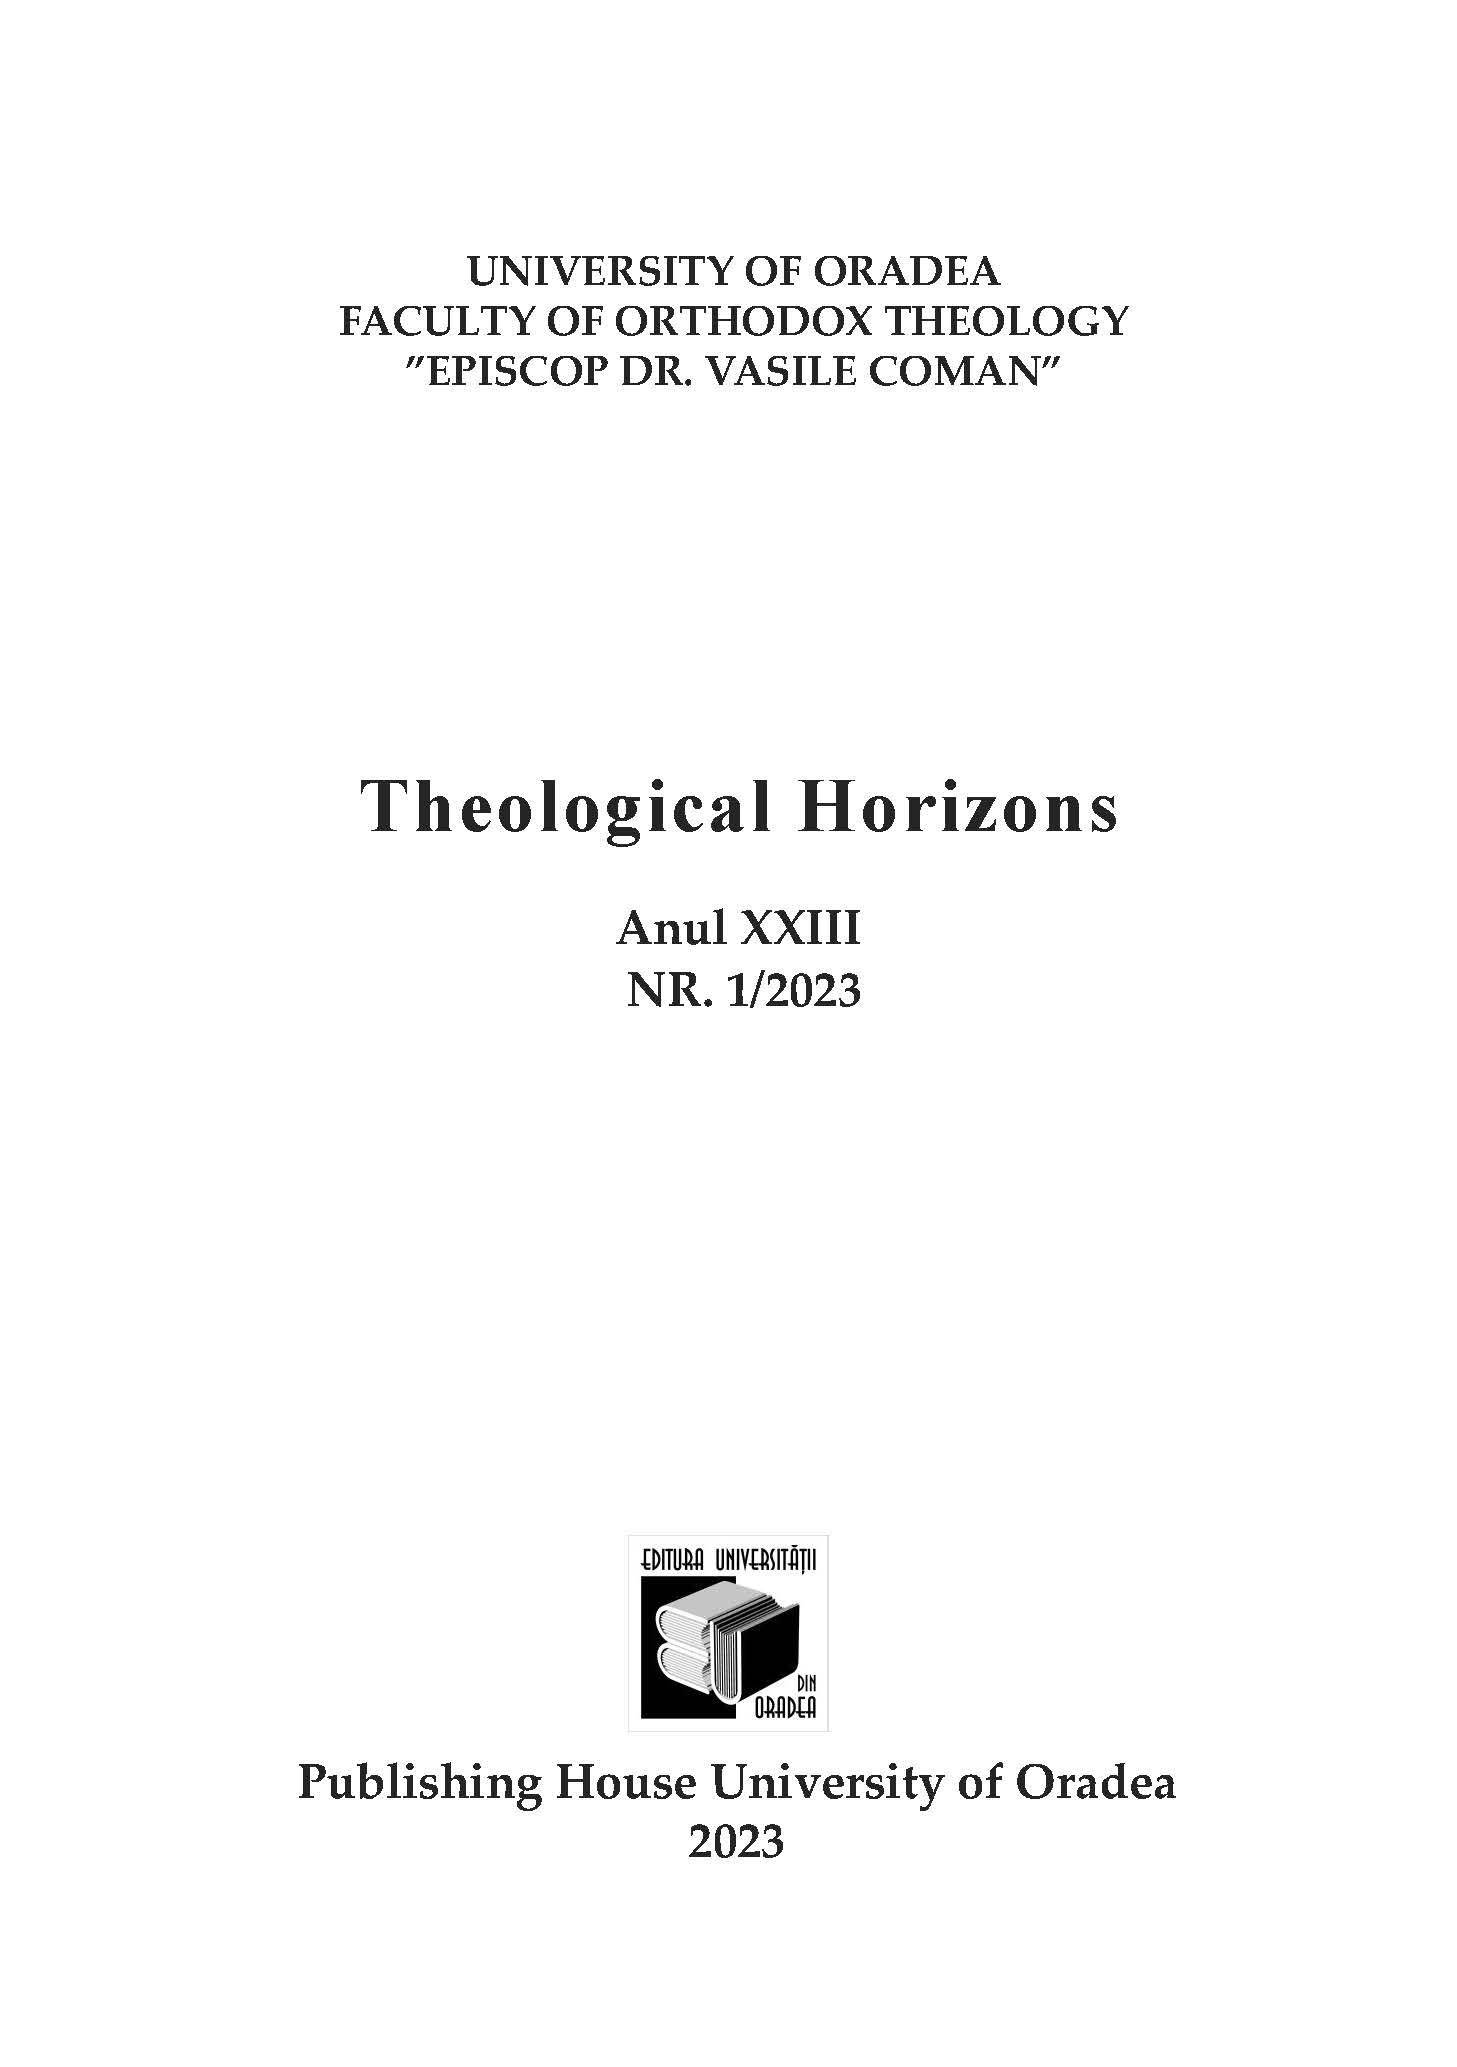 Alexis Torrance, Human Perfection in Byzantine Theology: Attaining the Fullness of Christ